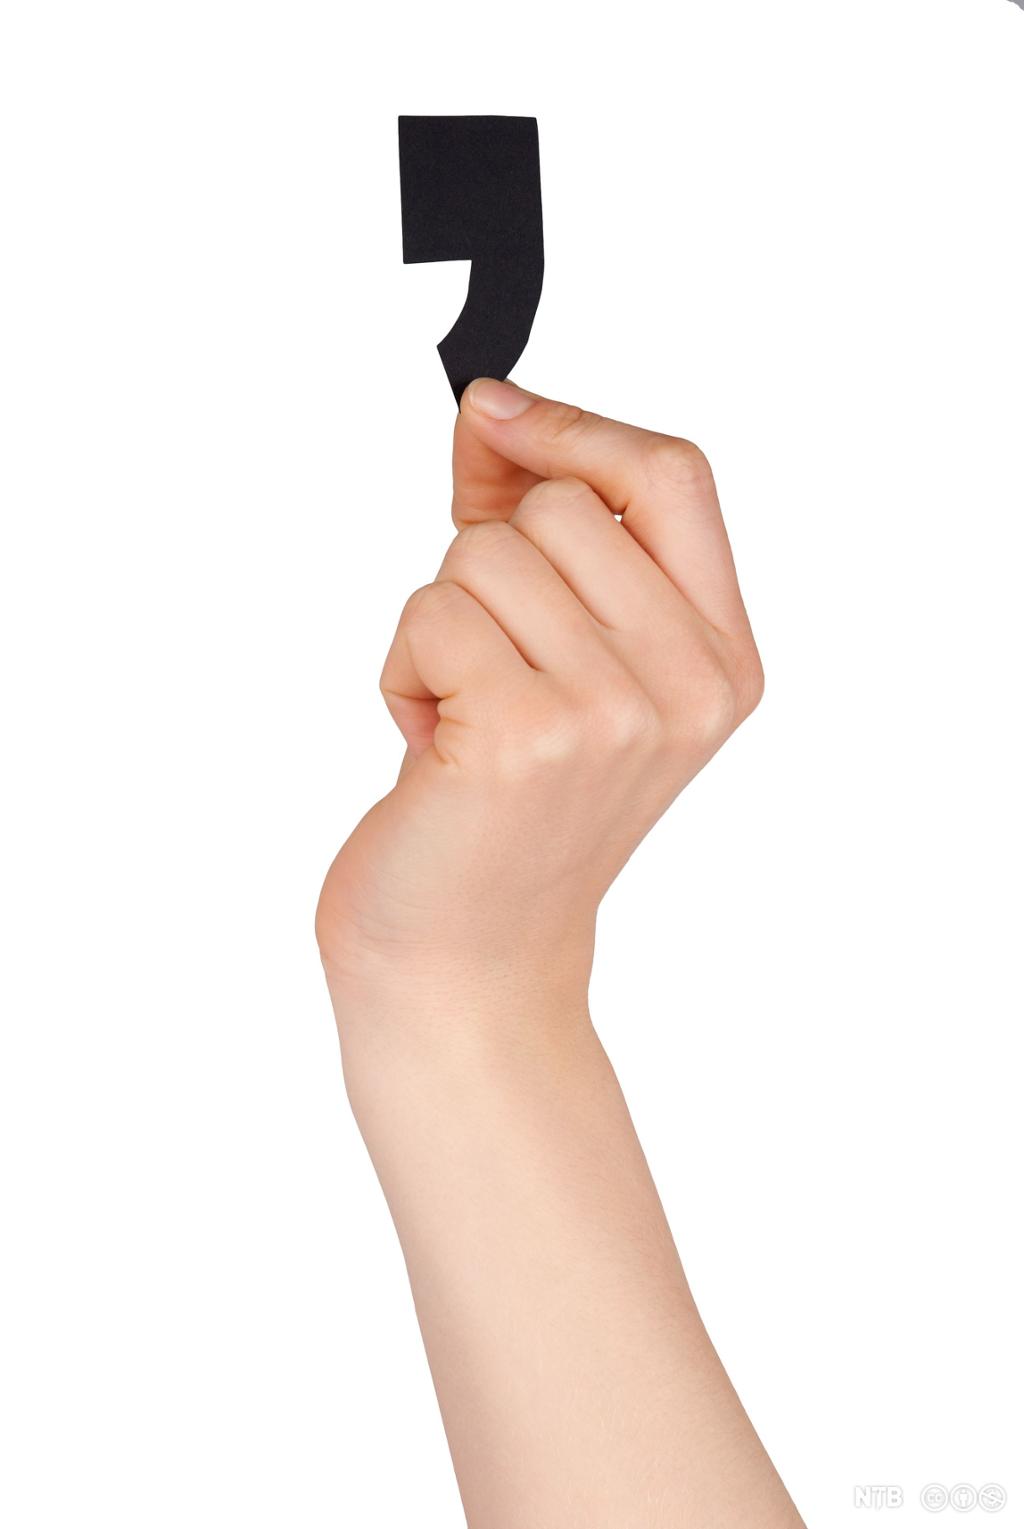 A hand holding up a black comma. Photo.